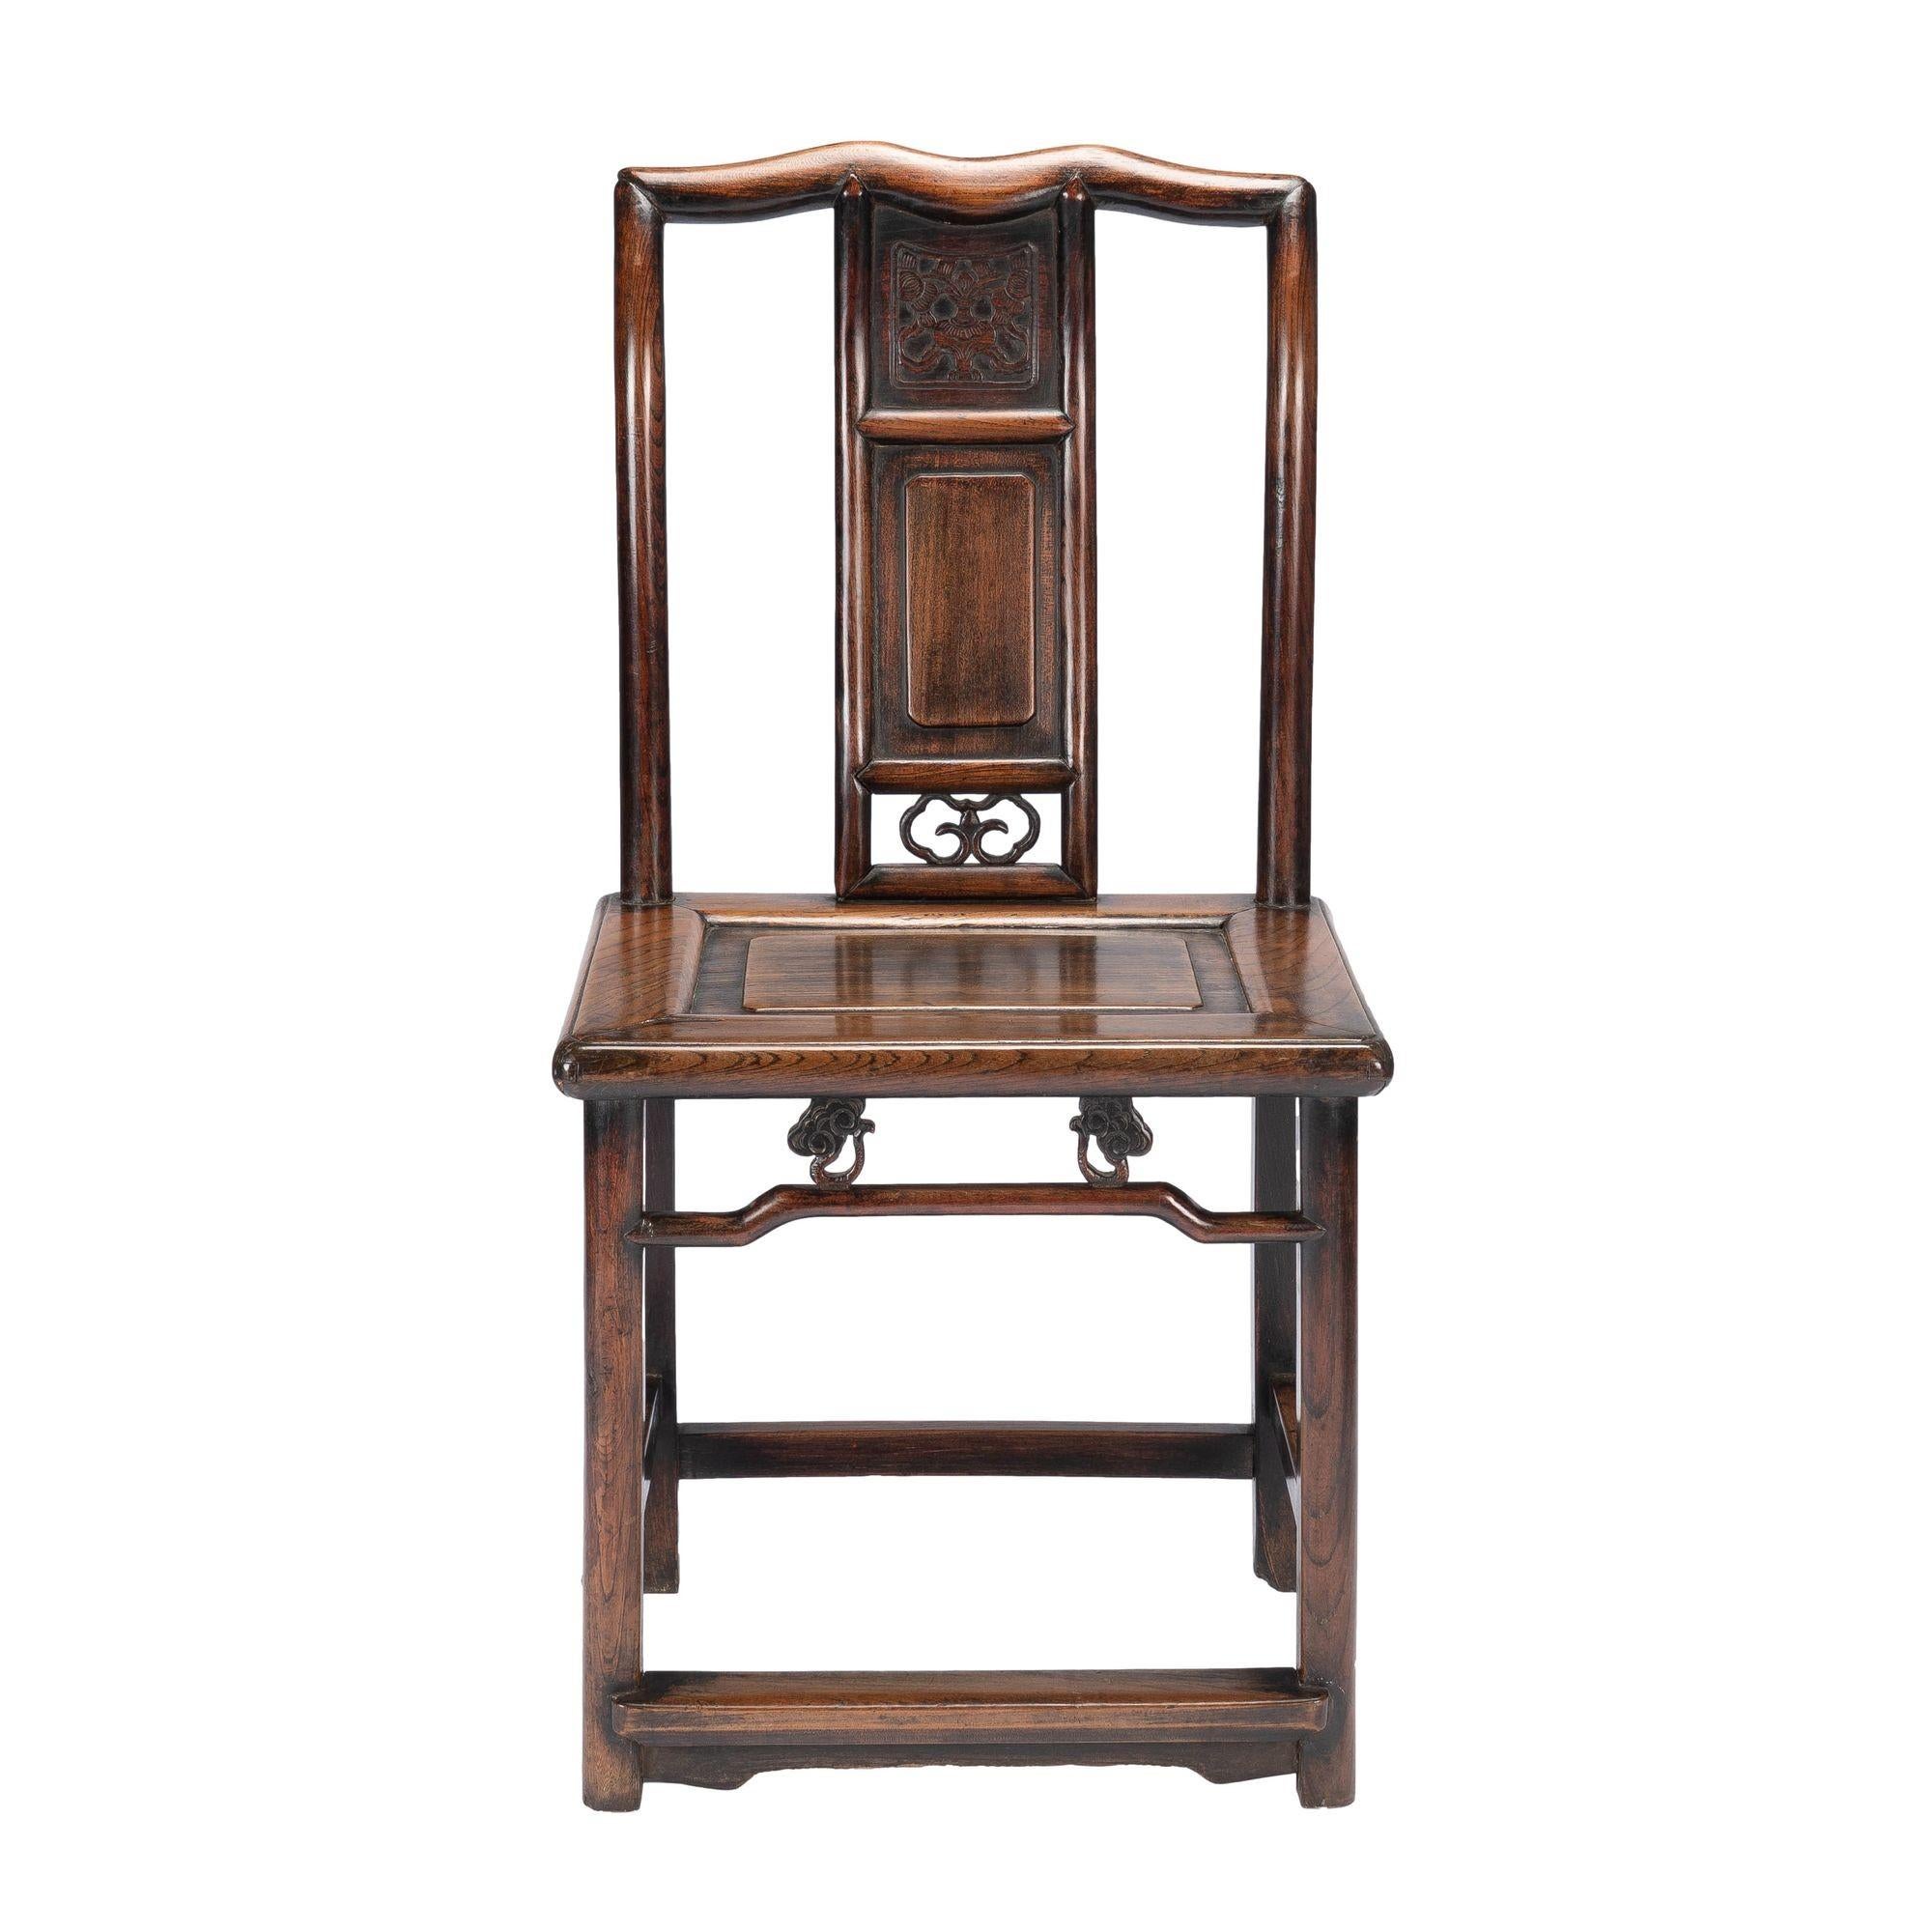 Chinese audience chair in the Ming Dynasty taste. The chair is made from Northern Chinese Elm with traces of original black lacquer throughout. The chair has a frame and panel seat with turned back rails which resolve into a splayed and yoke carved